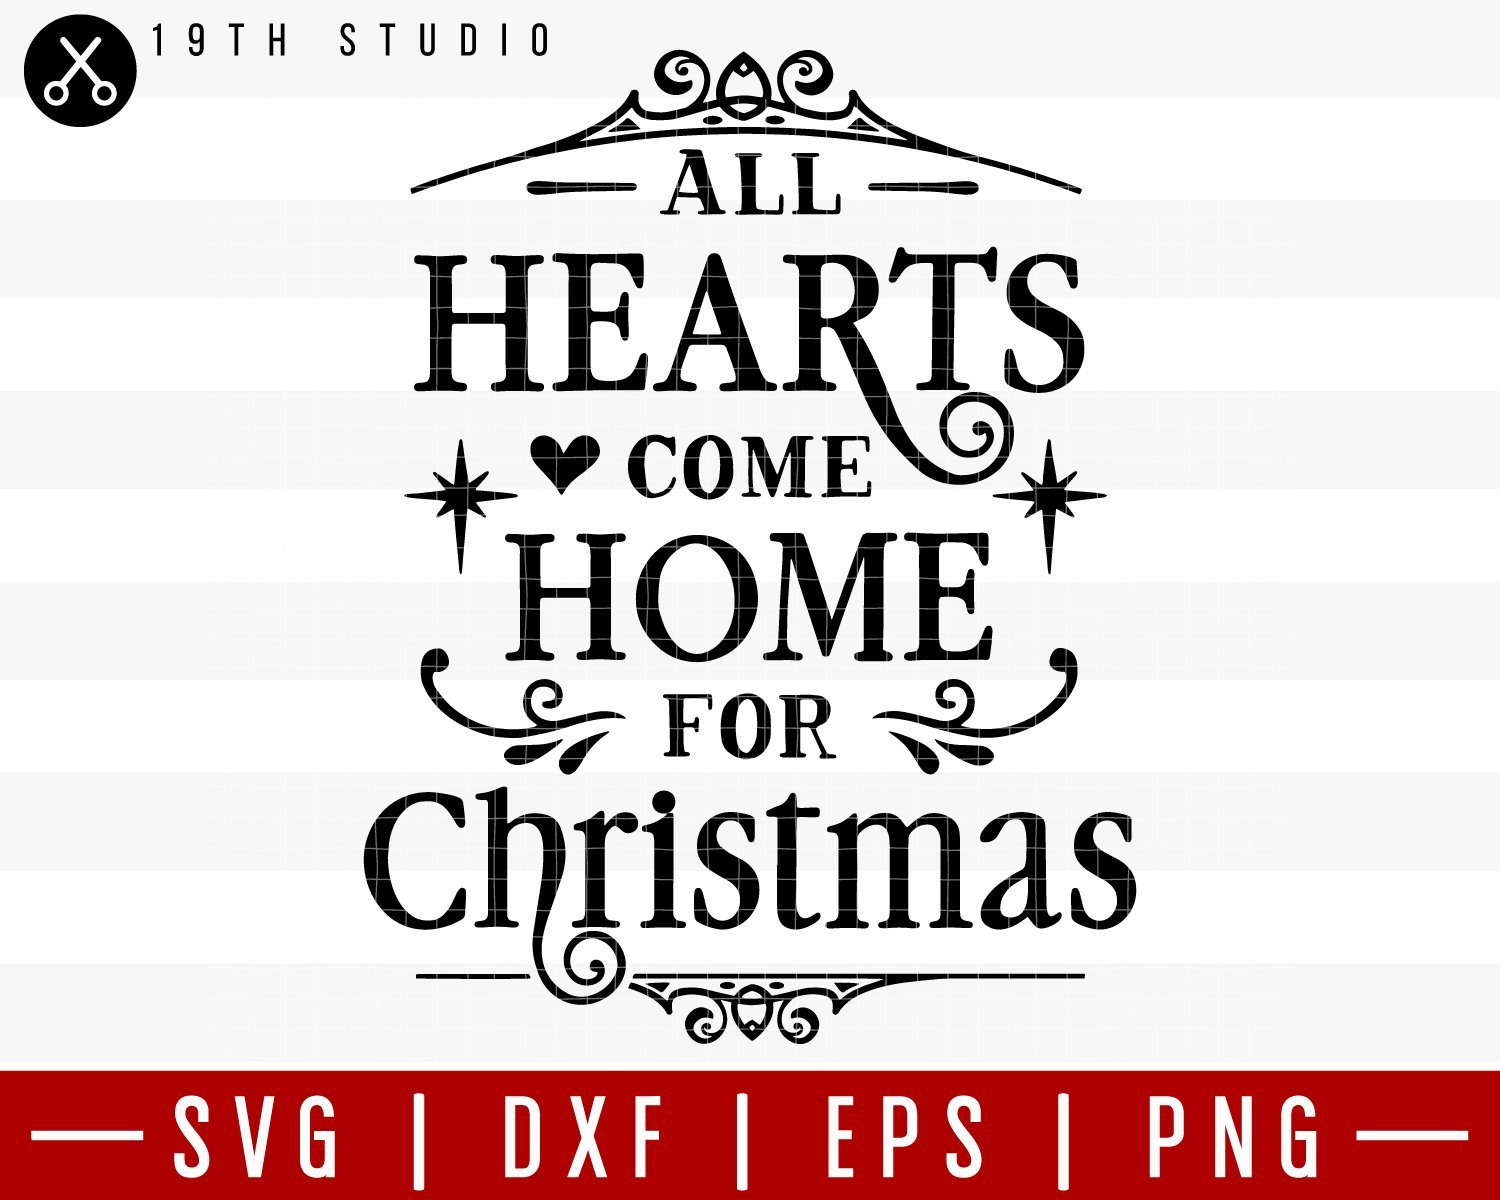 All hearts come home for Christmas SVG | M36F1 Craft House SVG - SVG files for Cricut and Silhouette